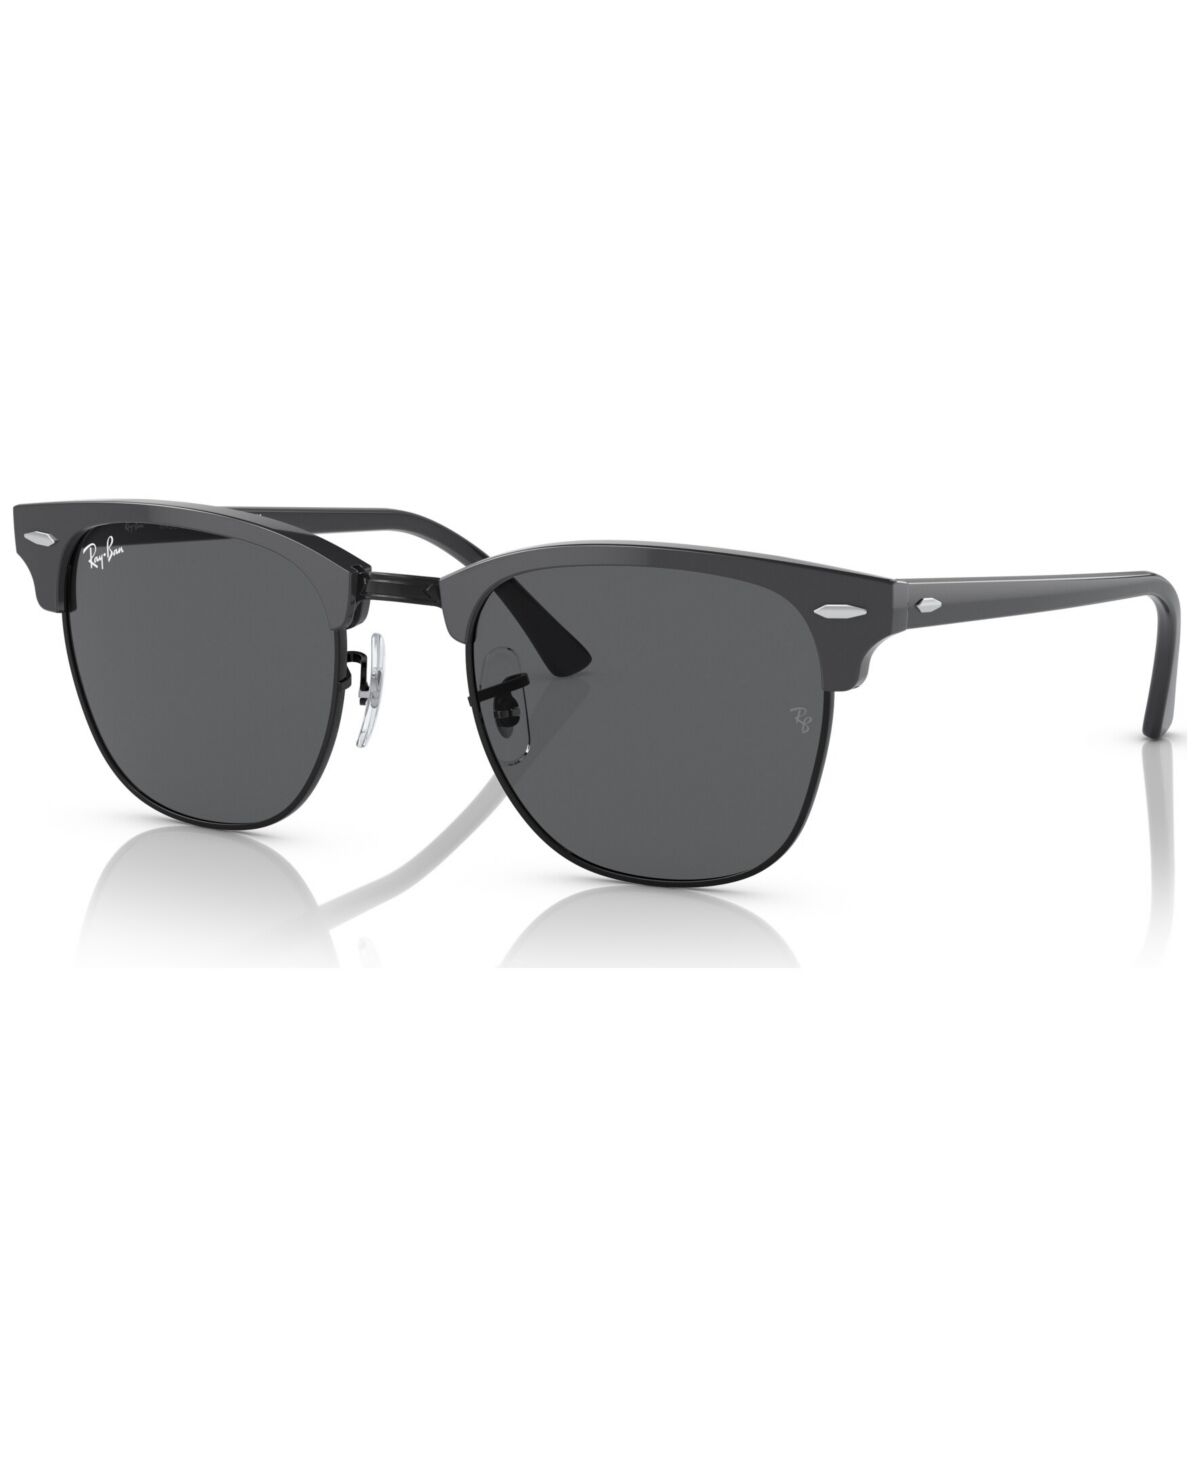 Ray-Ban Sunglasses, RB3016 Clubmaster - GRAY ON BLACK